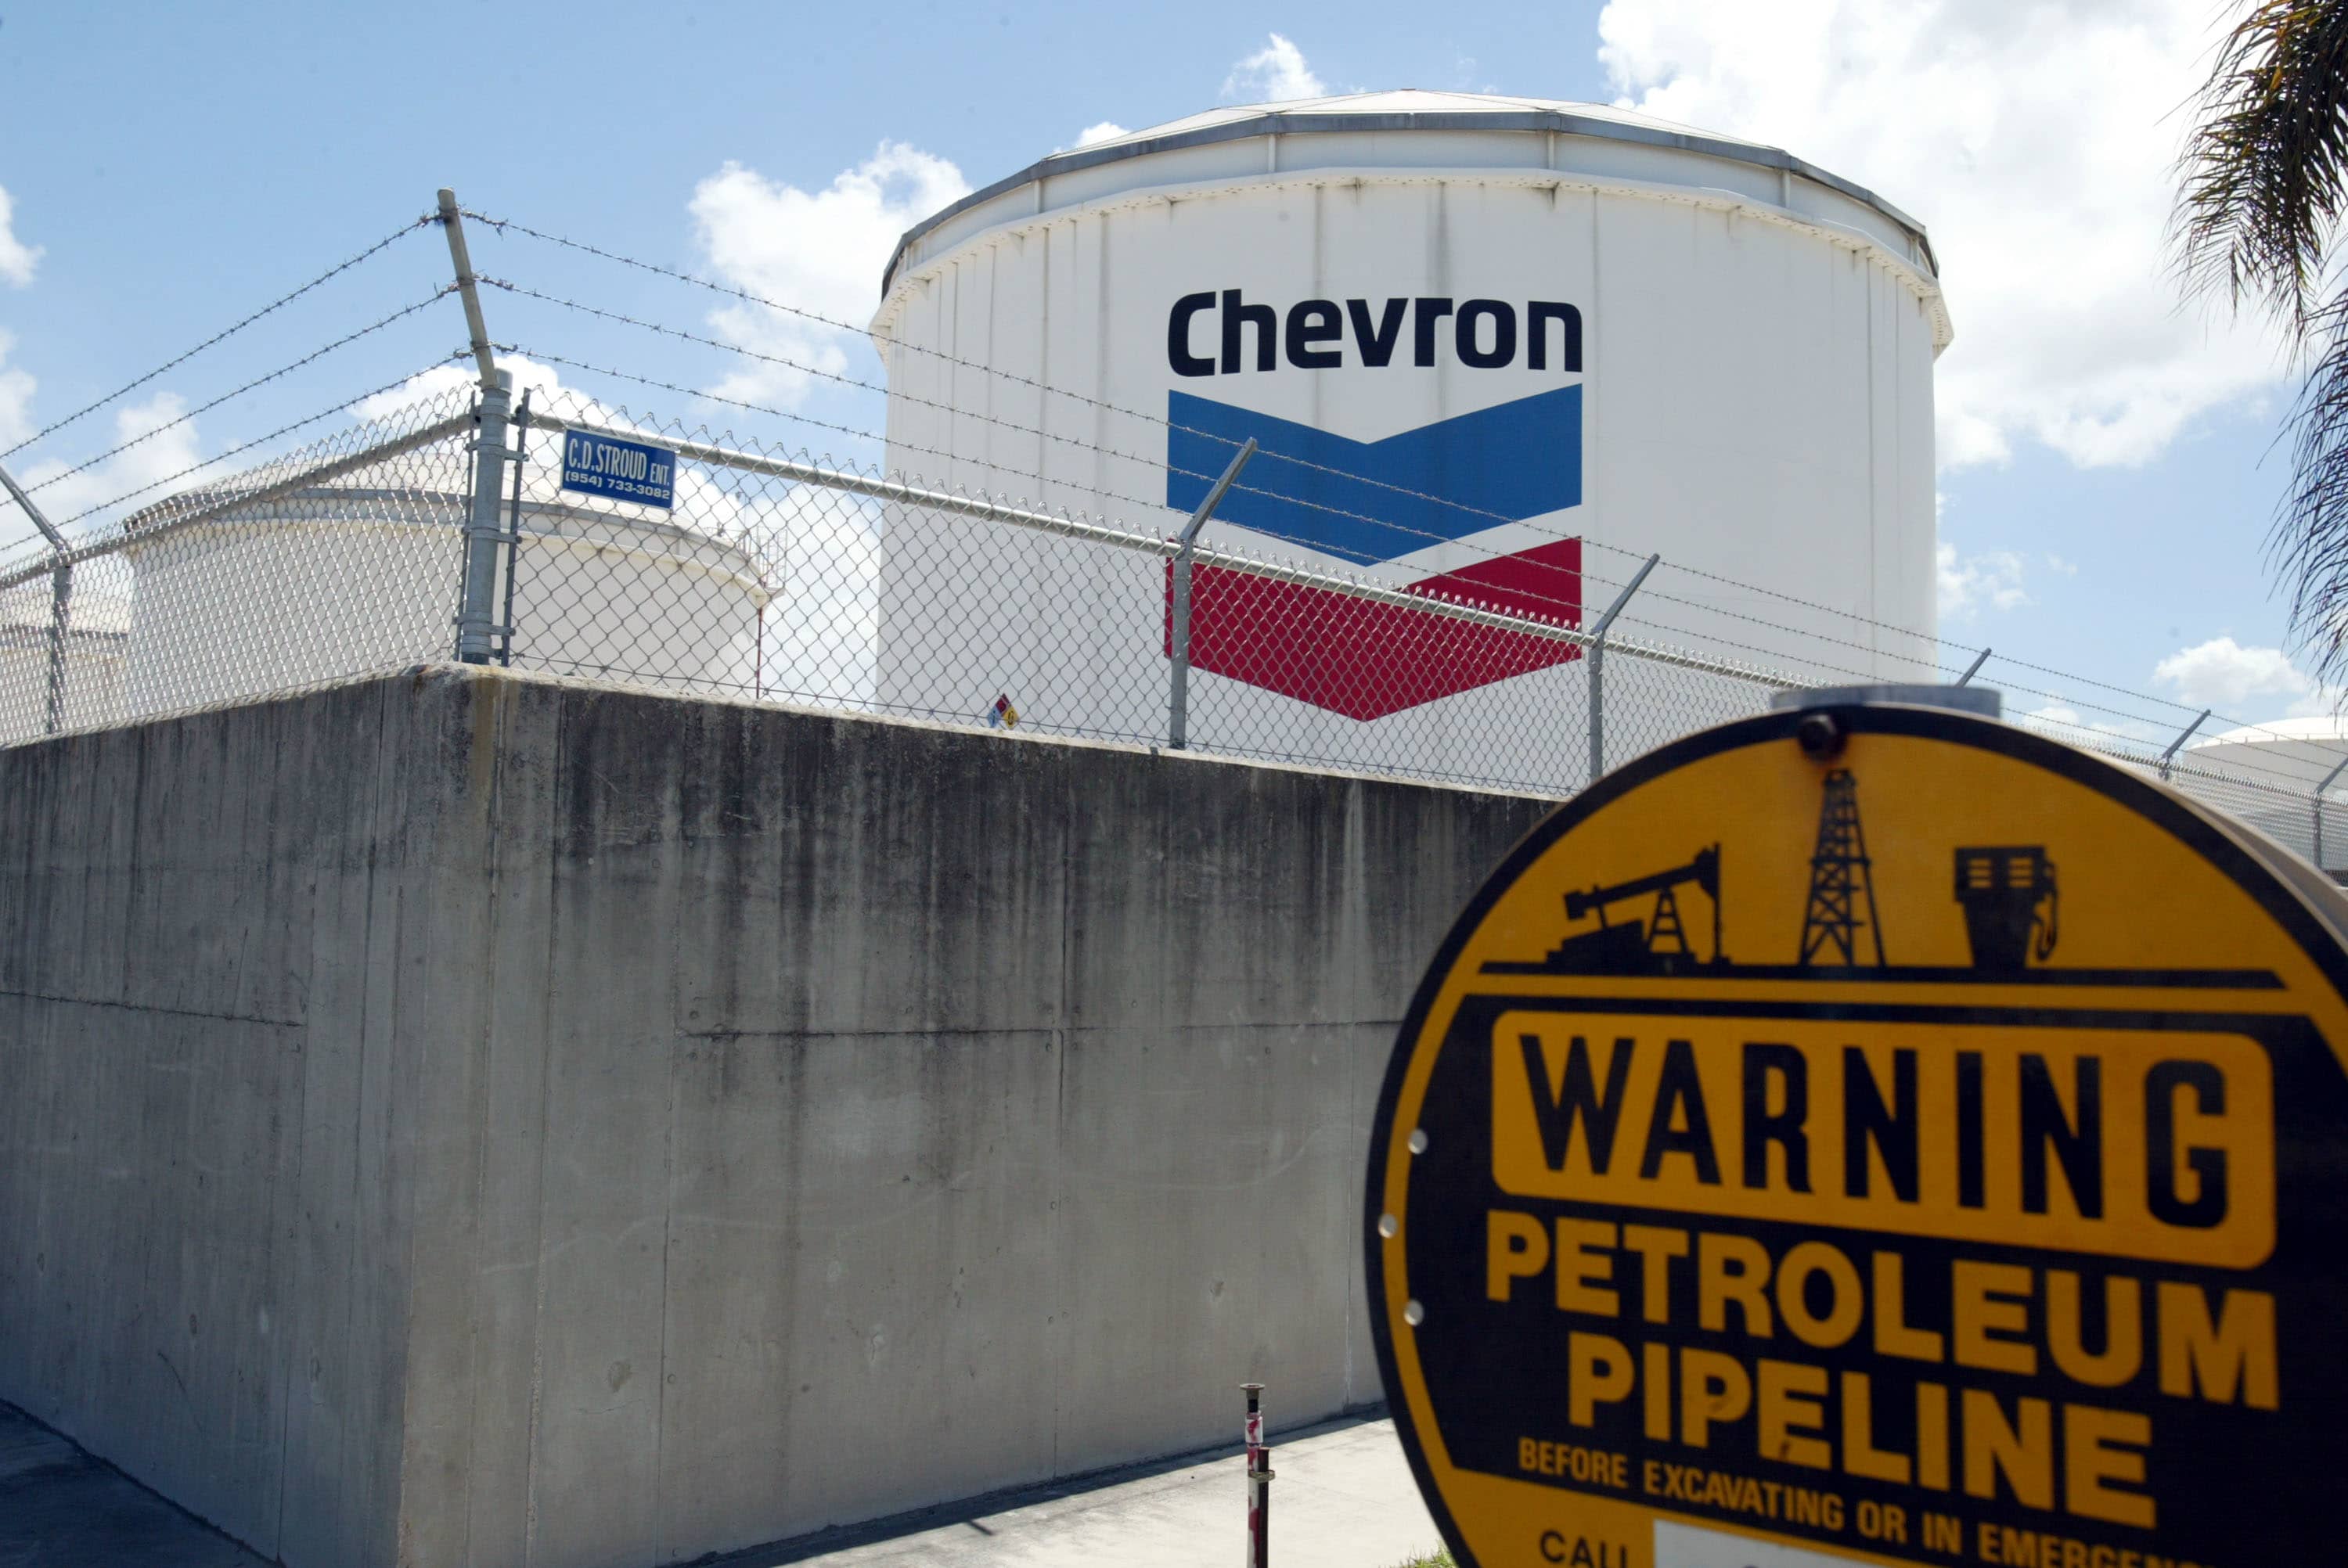 Chevron shares fall after oil giant reports an $8.3 billion loss for second quarter - CNBC